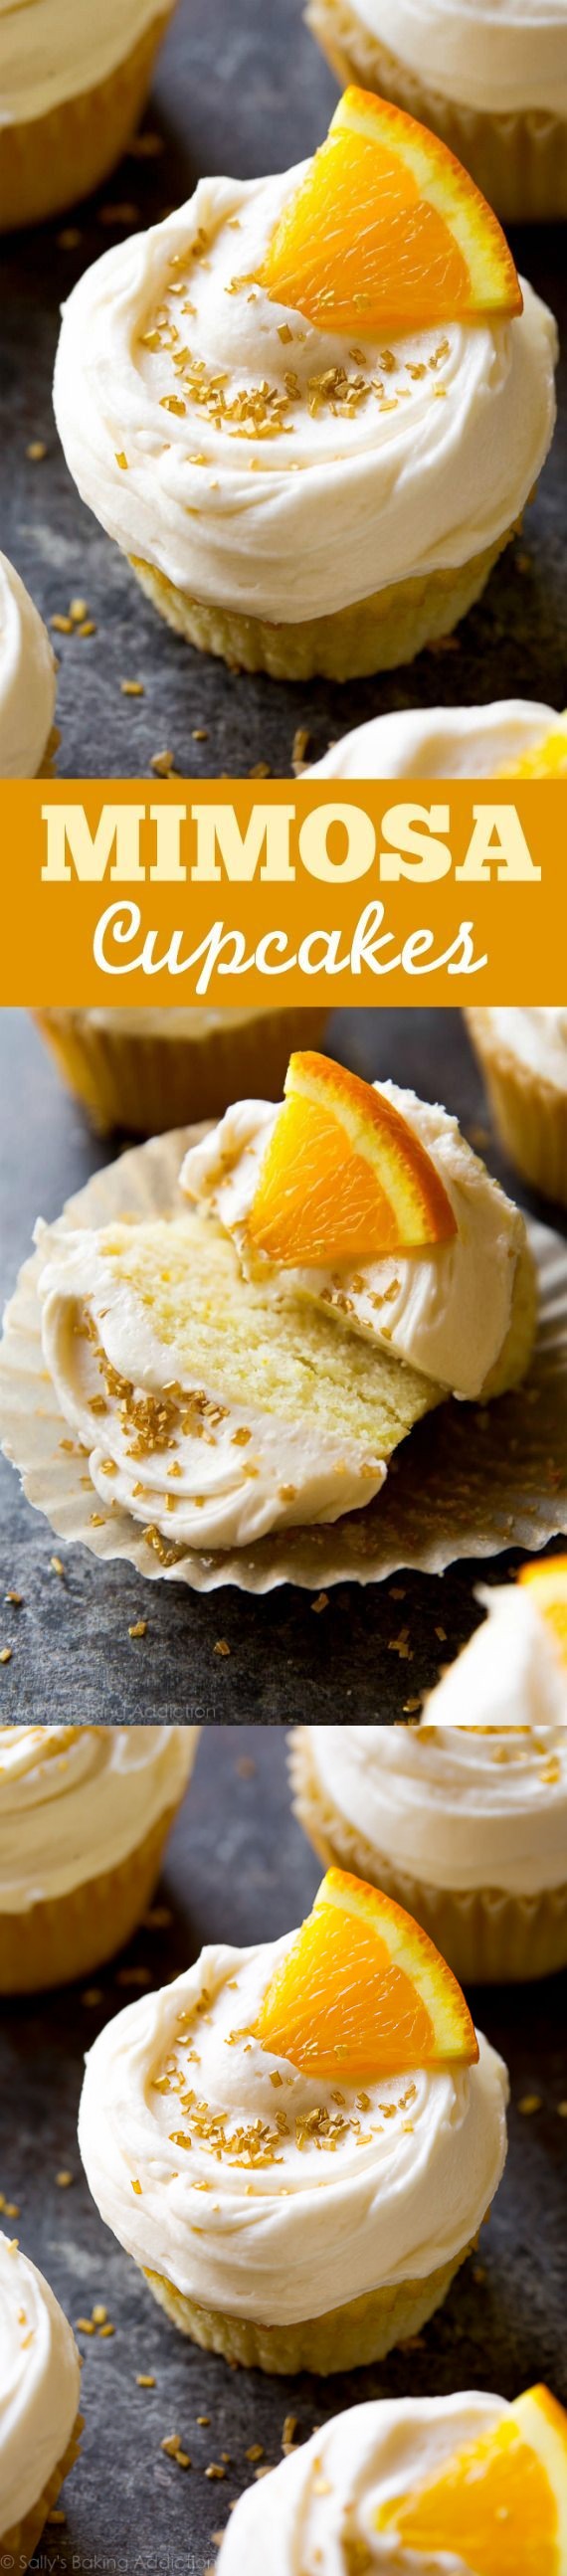 Fresh-Squeezed Mimosa Cupcakes